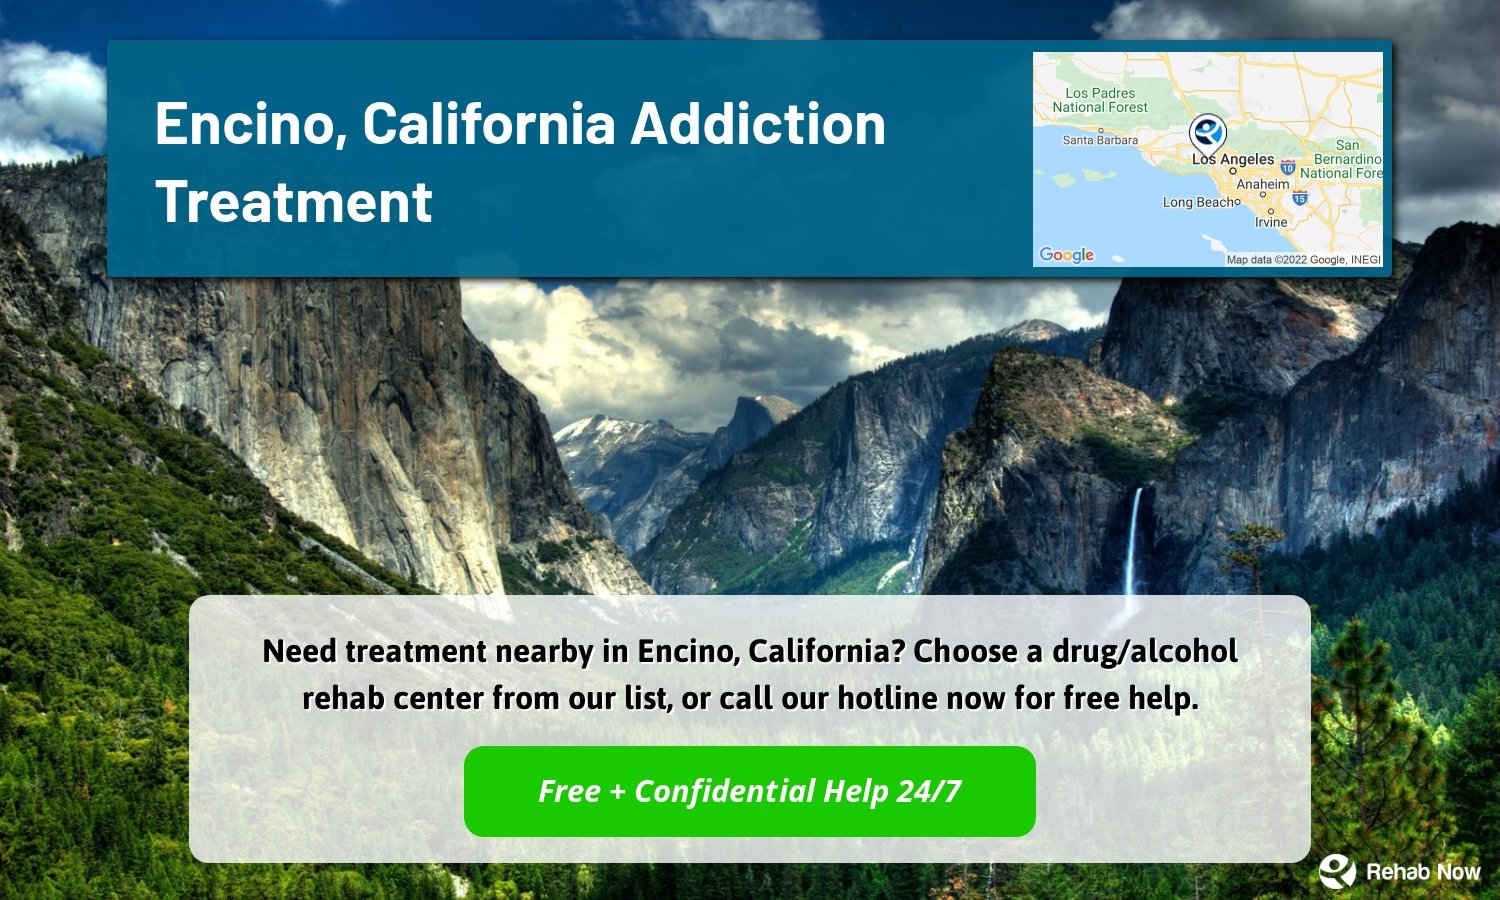 Need treatment nearby in Encino, California? Choose a drug/alcohol rehab center from our list, or call our hotline now for free help.